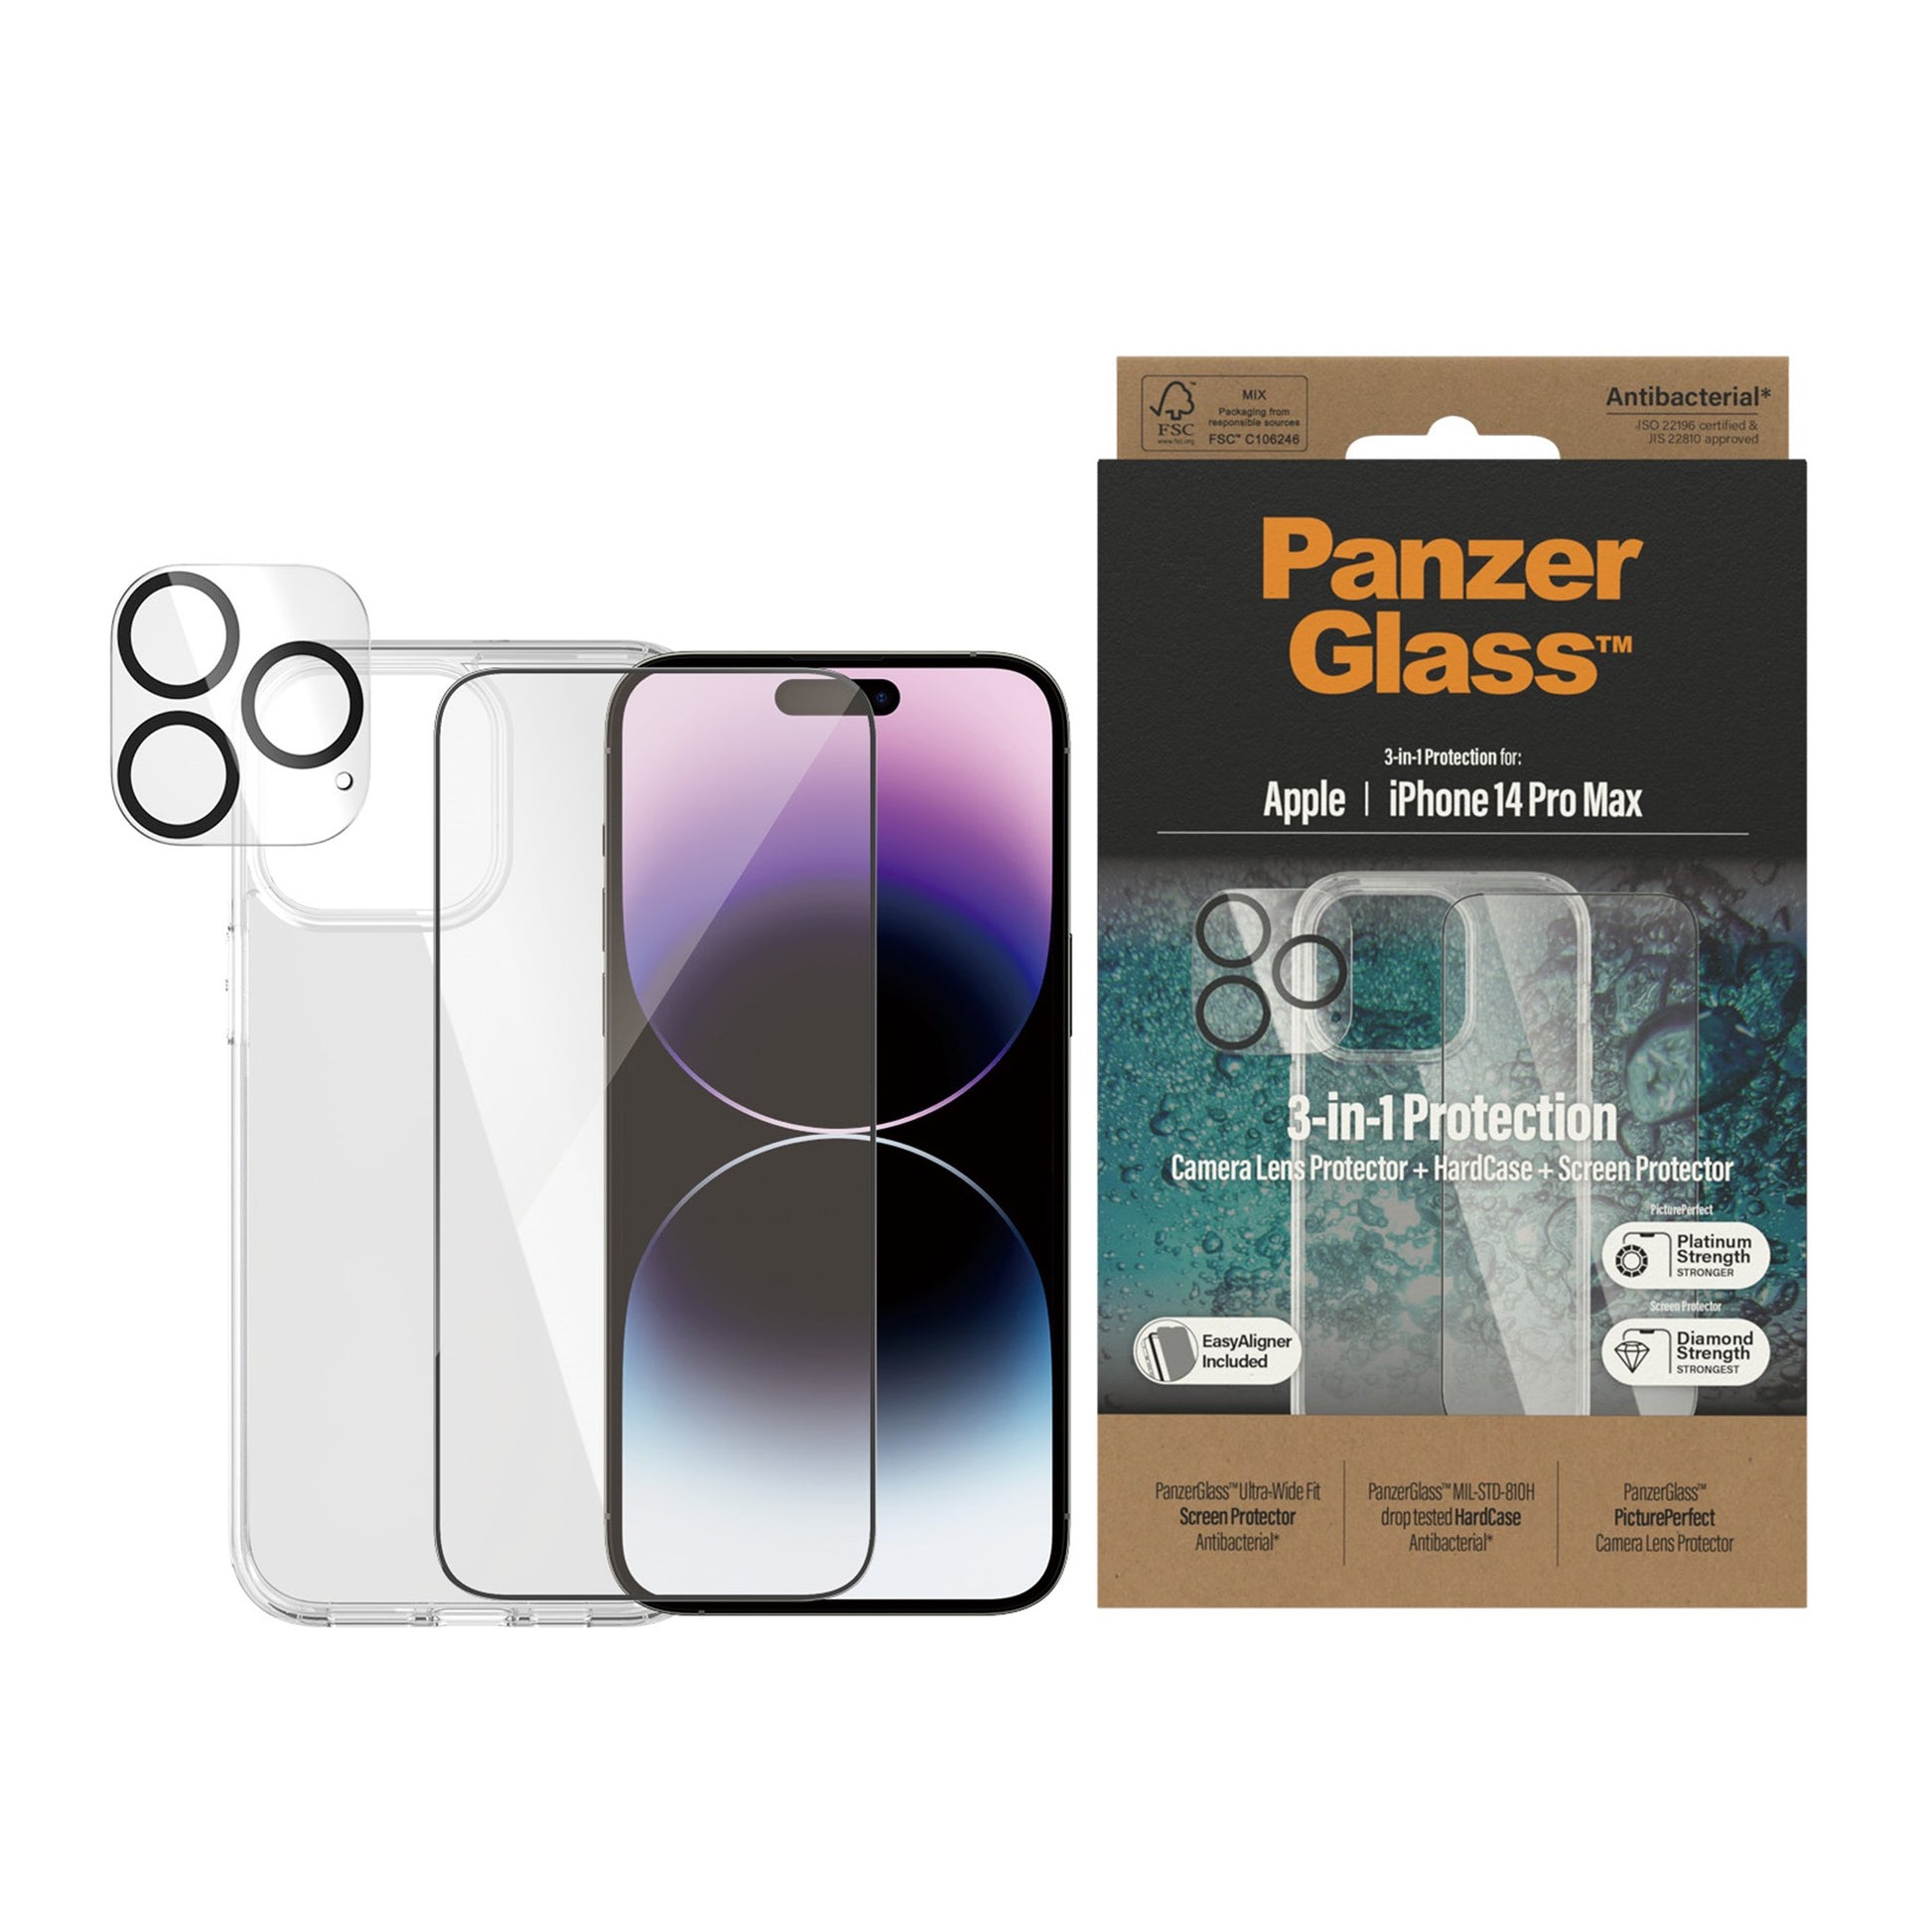 PanzerGlass™ 3-in-1 Protection Pack Apple iPhone 14 Pro Max 2